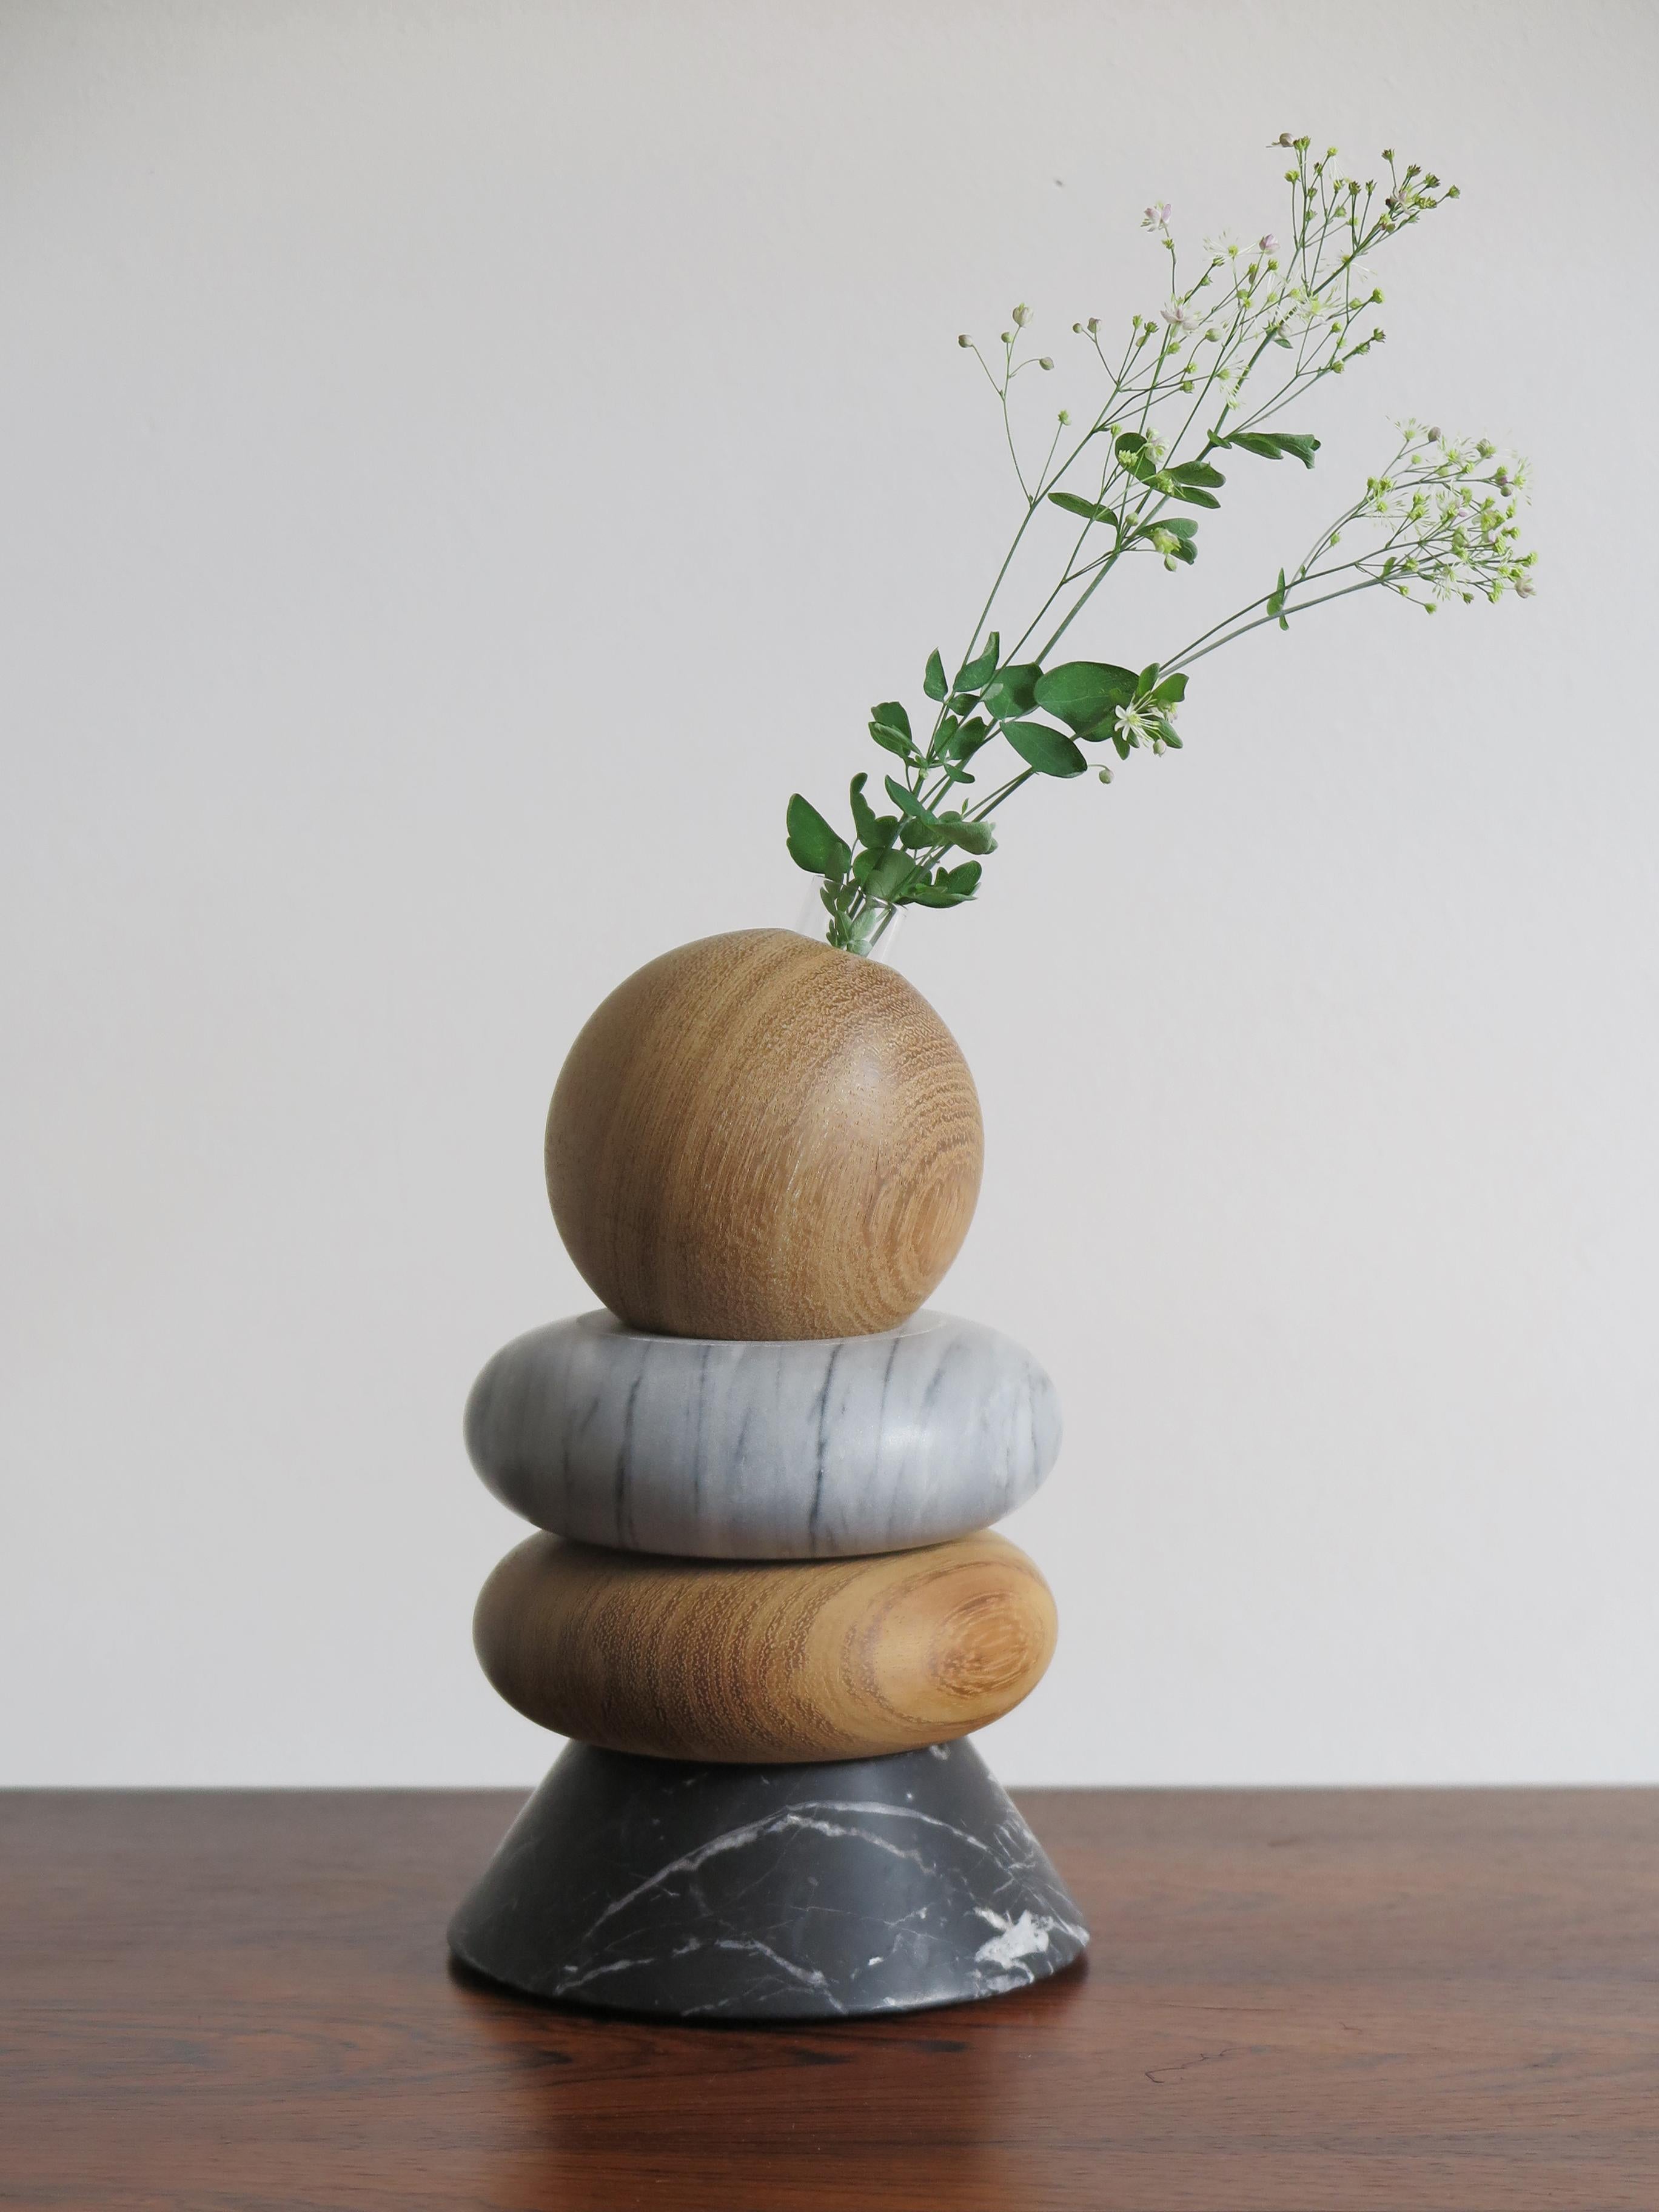 Contemporary handmade sculpture, candleholder, flower vase modular as you like made up of two marbles:
Carrara white, Grey Bardiglio, solid wood and glass ampoule for fresh flowers.

Designed for large, contemporary and luxurious environments